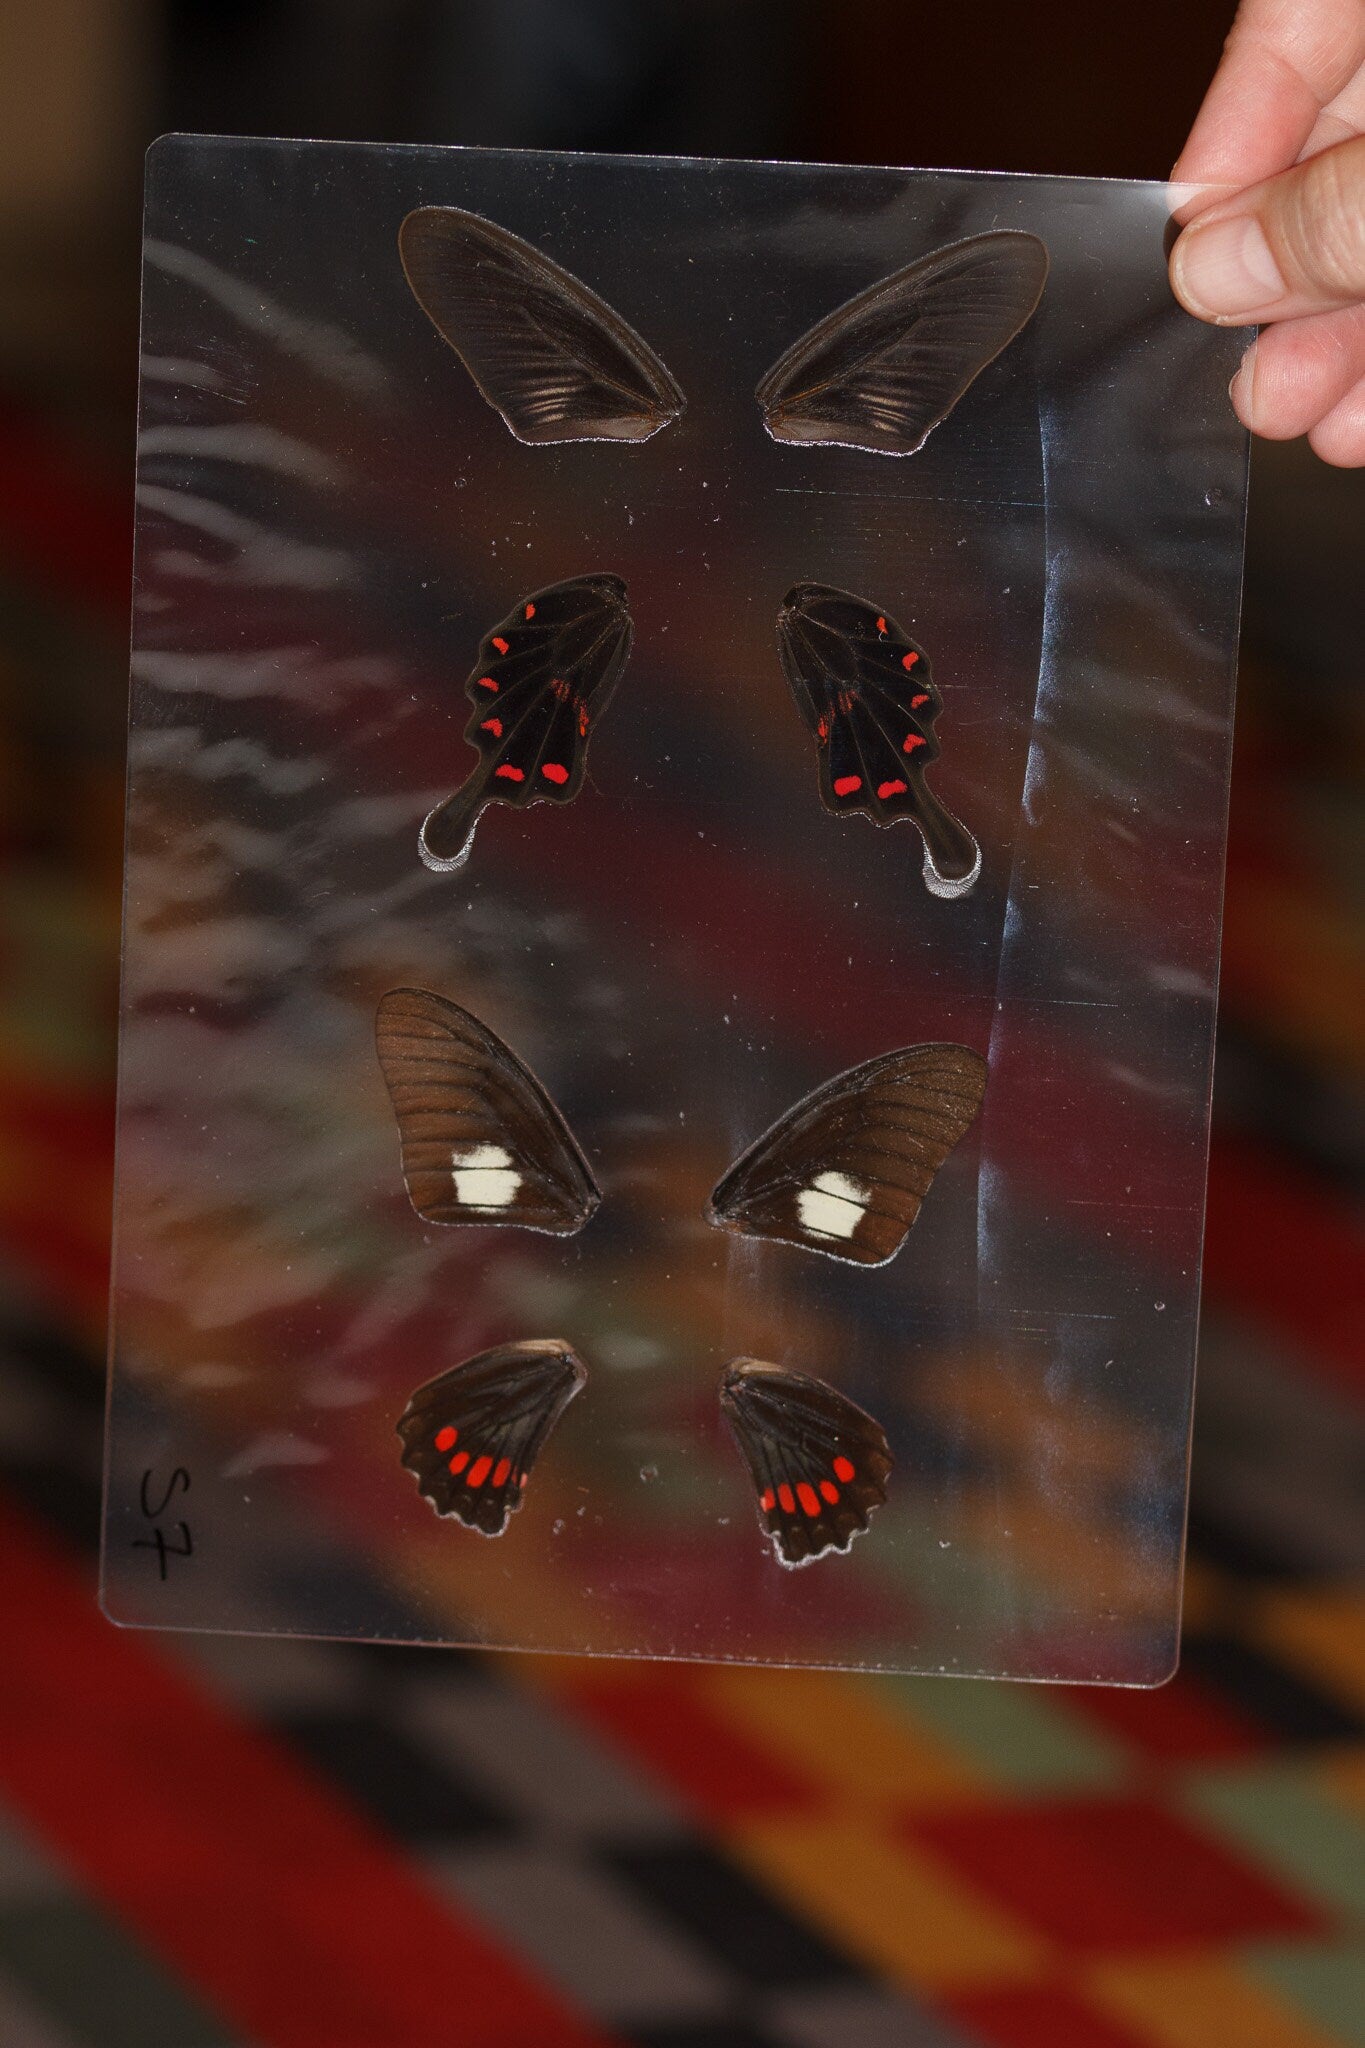 Butterfly Wings GLOSSY LAMINATED SHEET Real Ethically Sourced Specimens Moths Butterflies Wings for Art -- S7